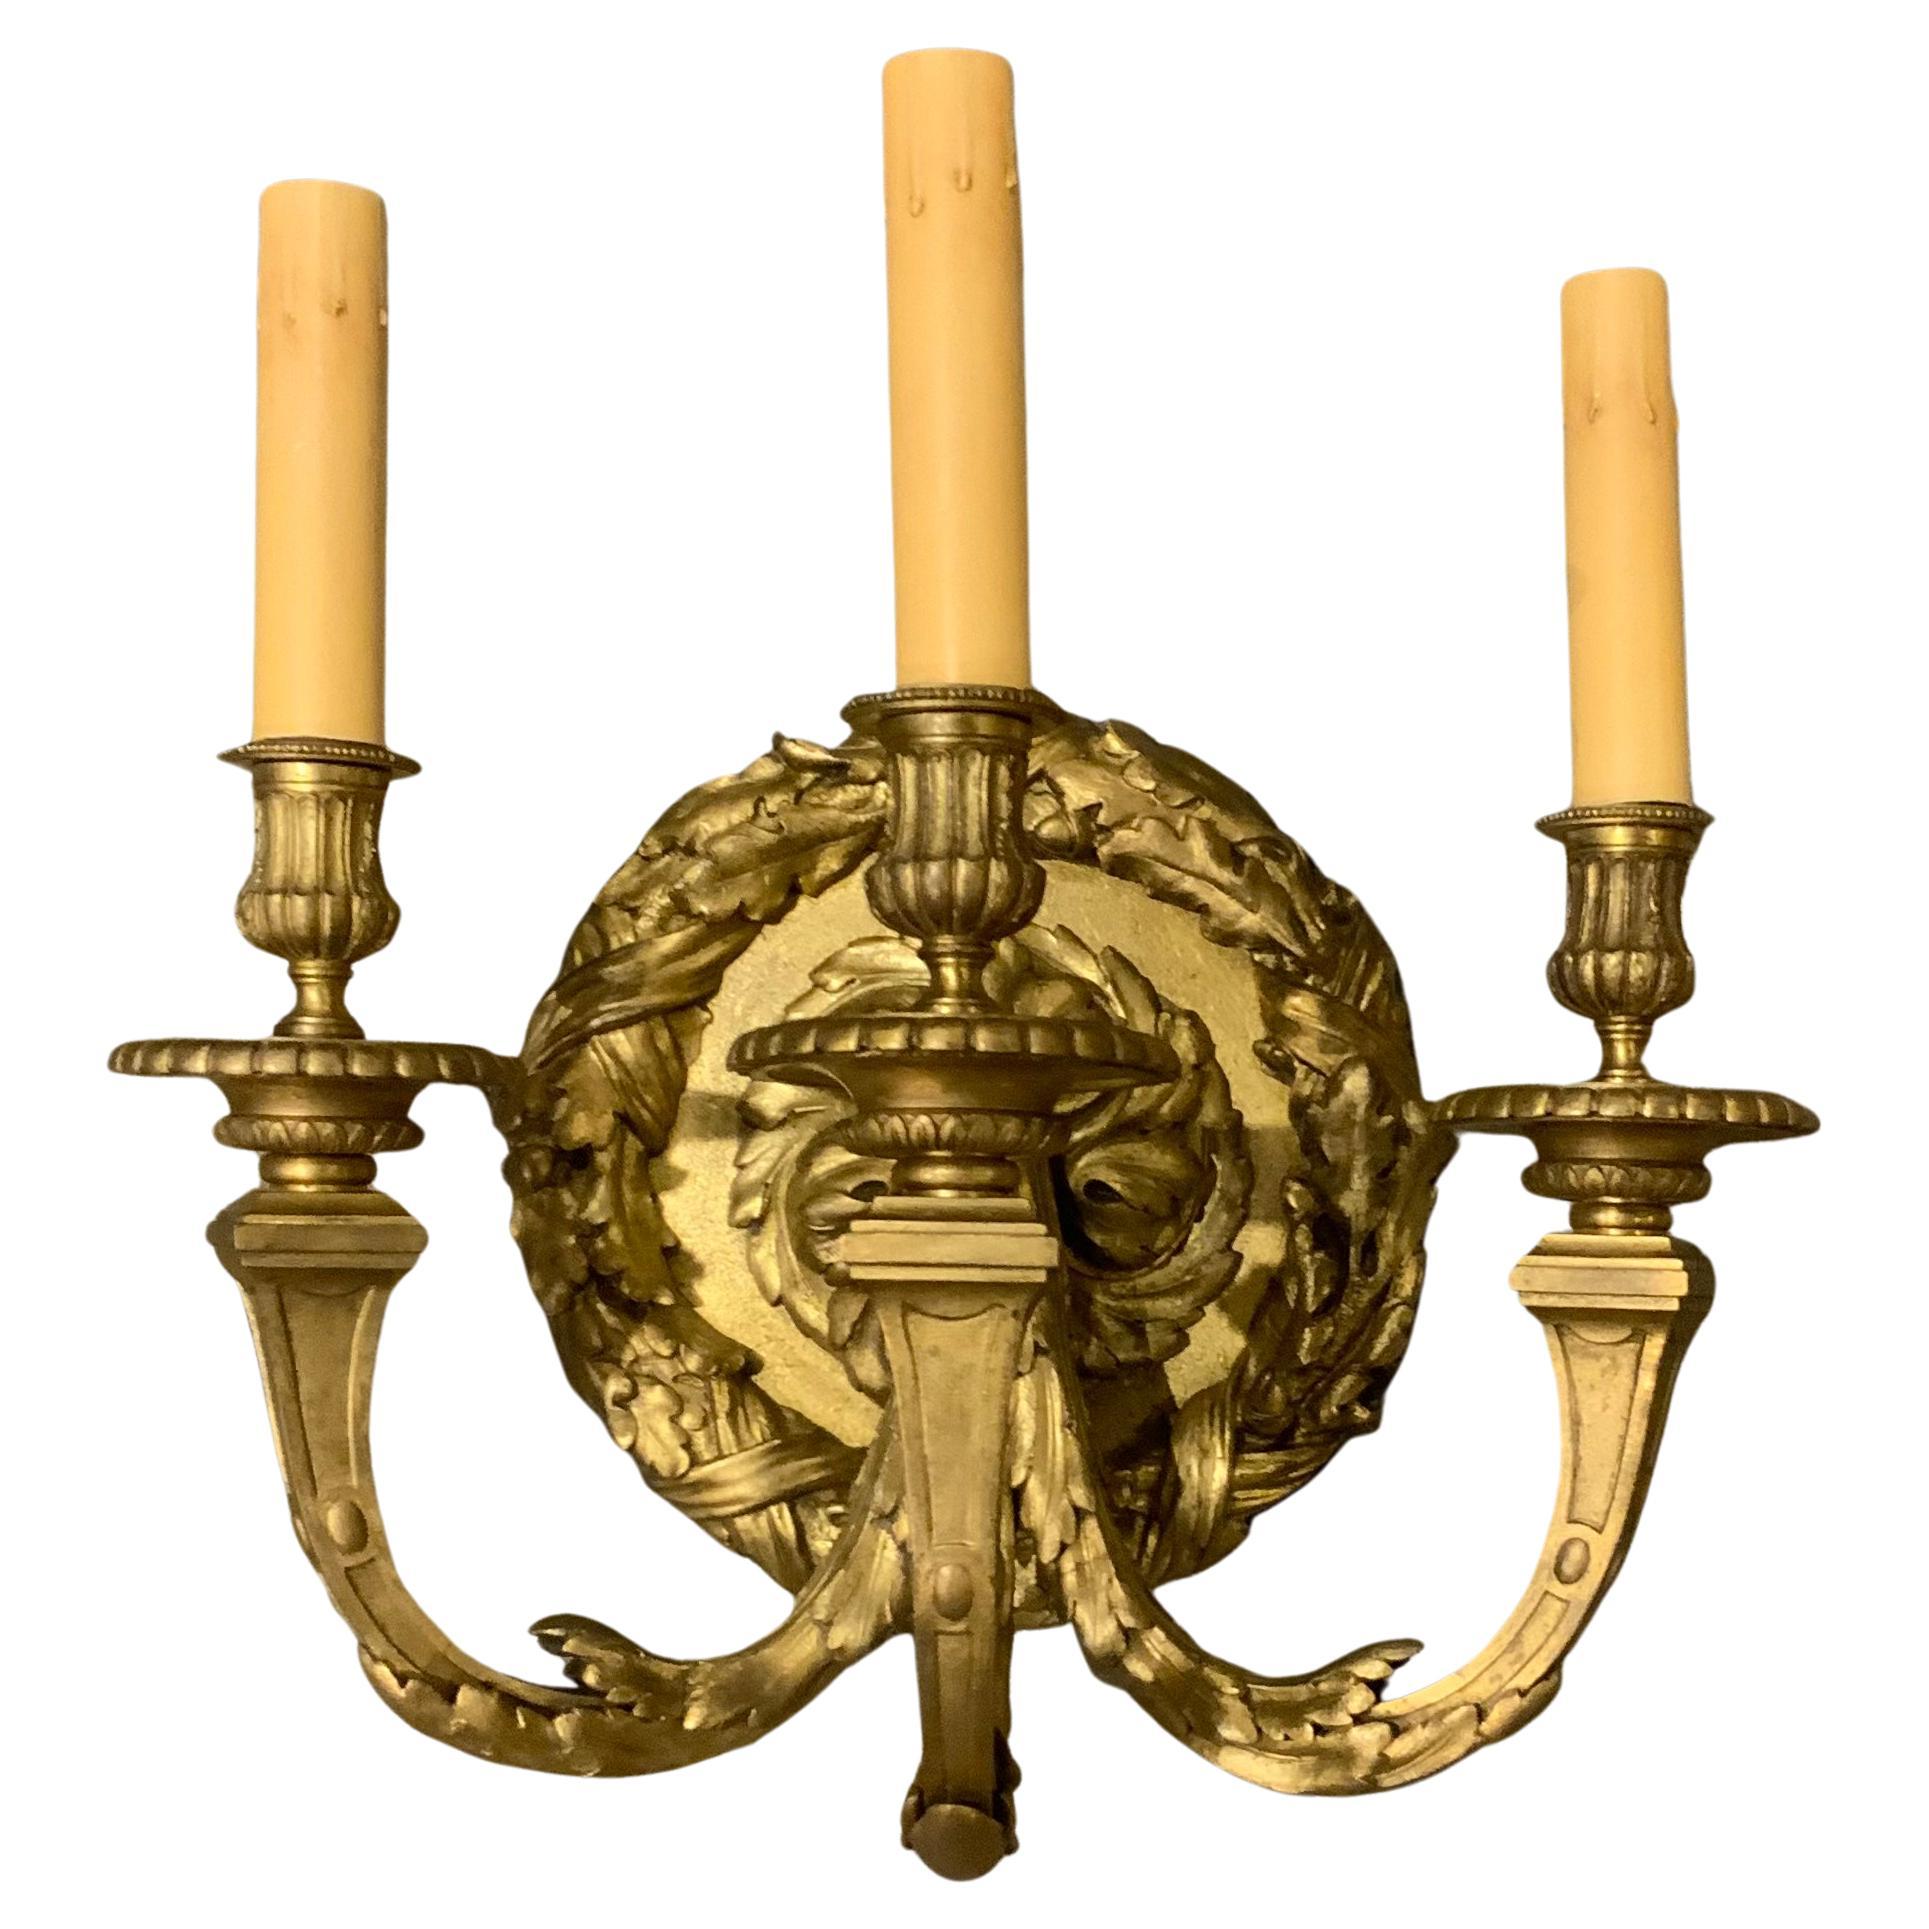 Large French Bronze Dore Single Light Sconce with Three Lights, Wired